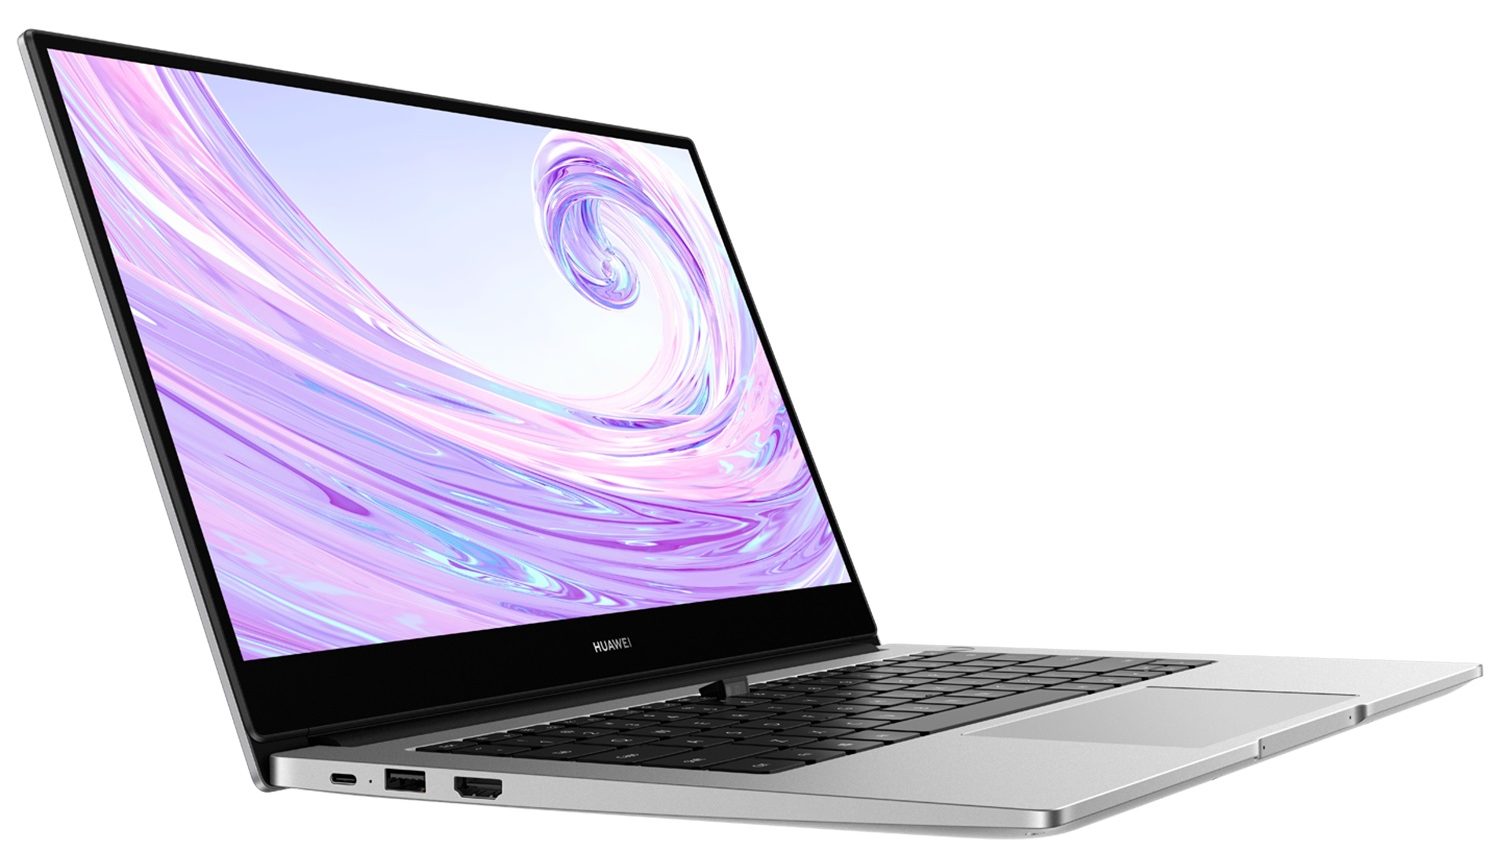 ice cream Release Travel Huawei MateBook D 14 (2020) review - a big effort from the Chinese company  to conquer the mid-range market | LaptopMedia.com